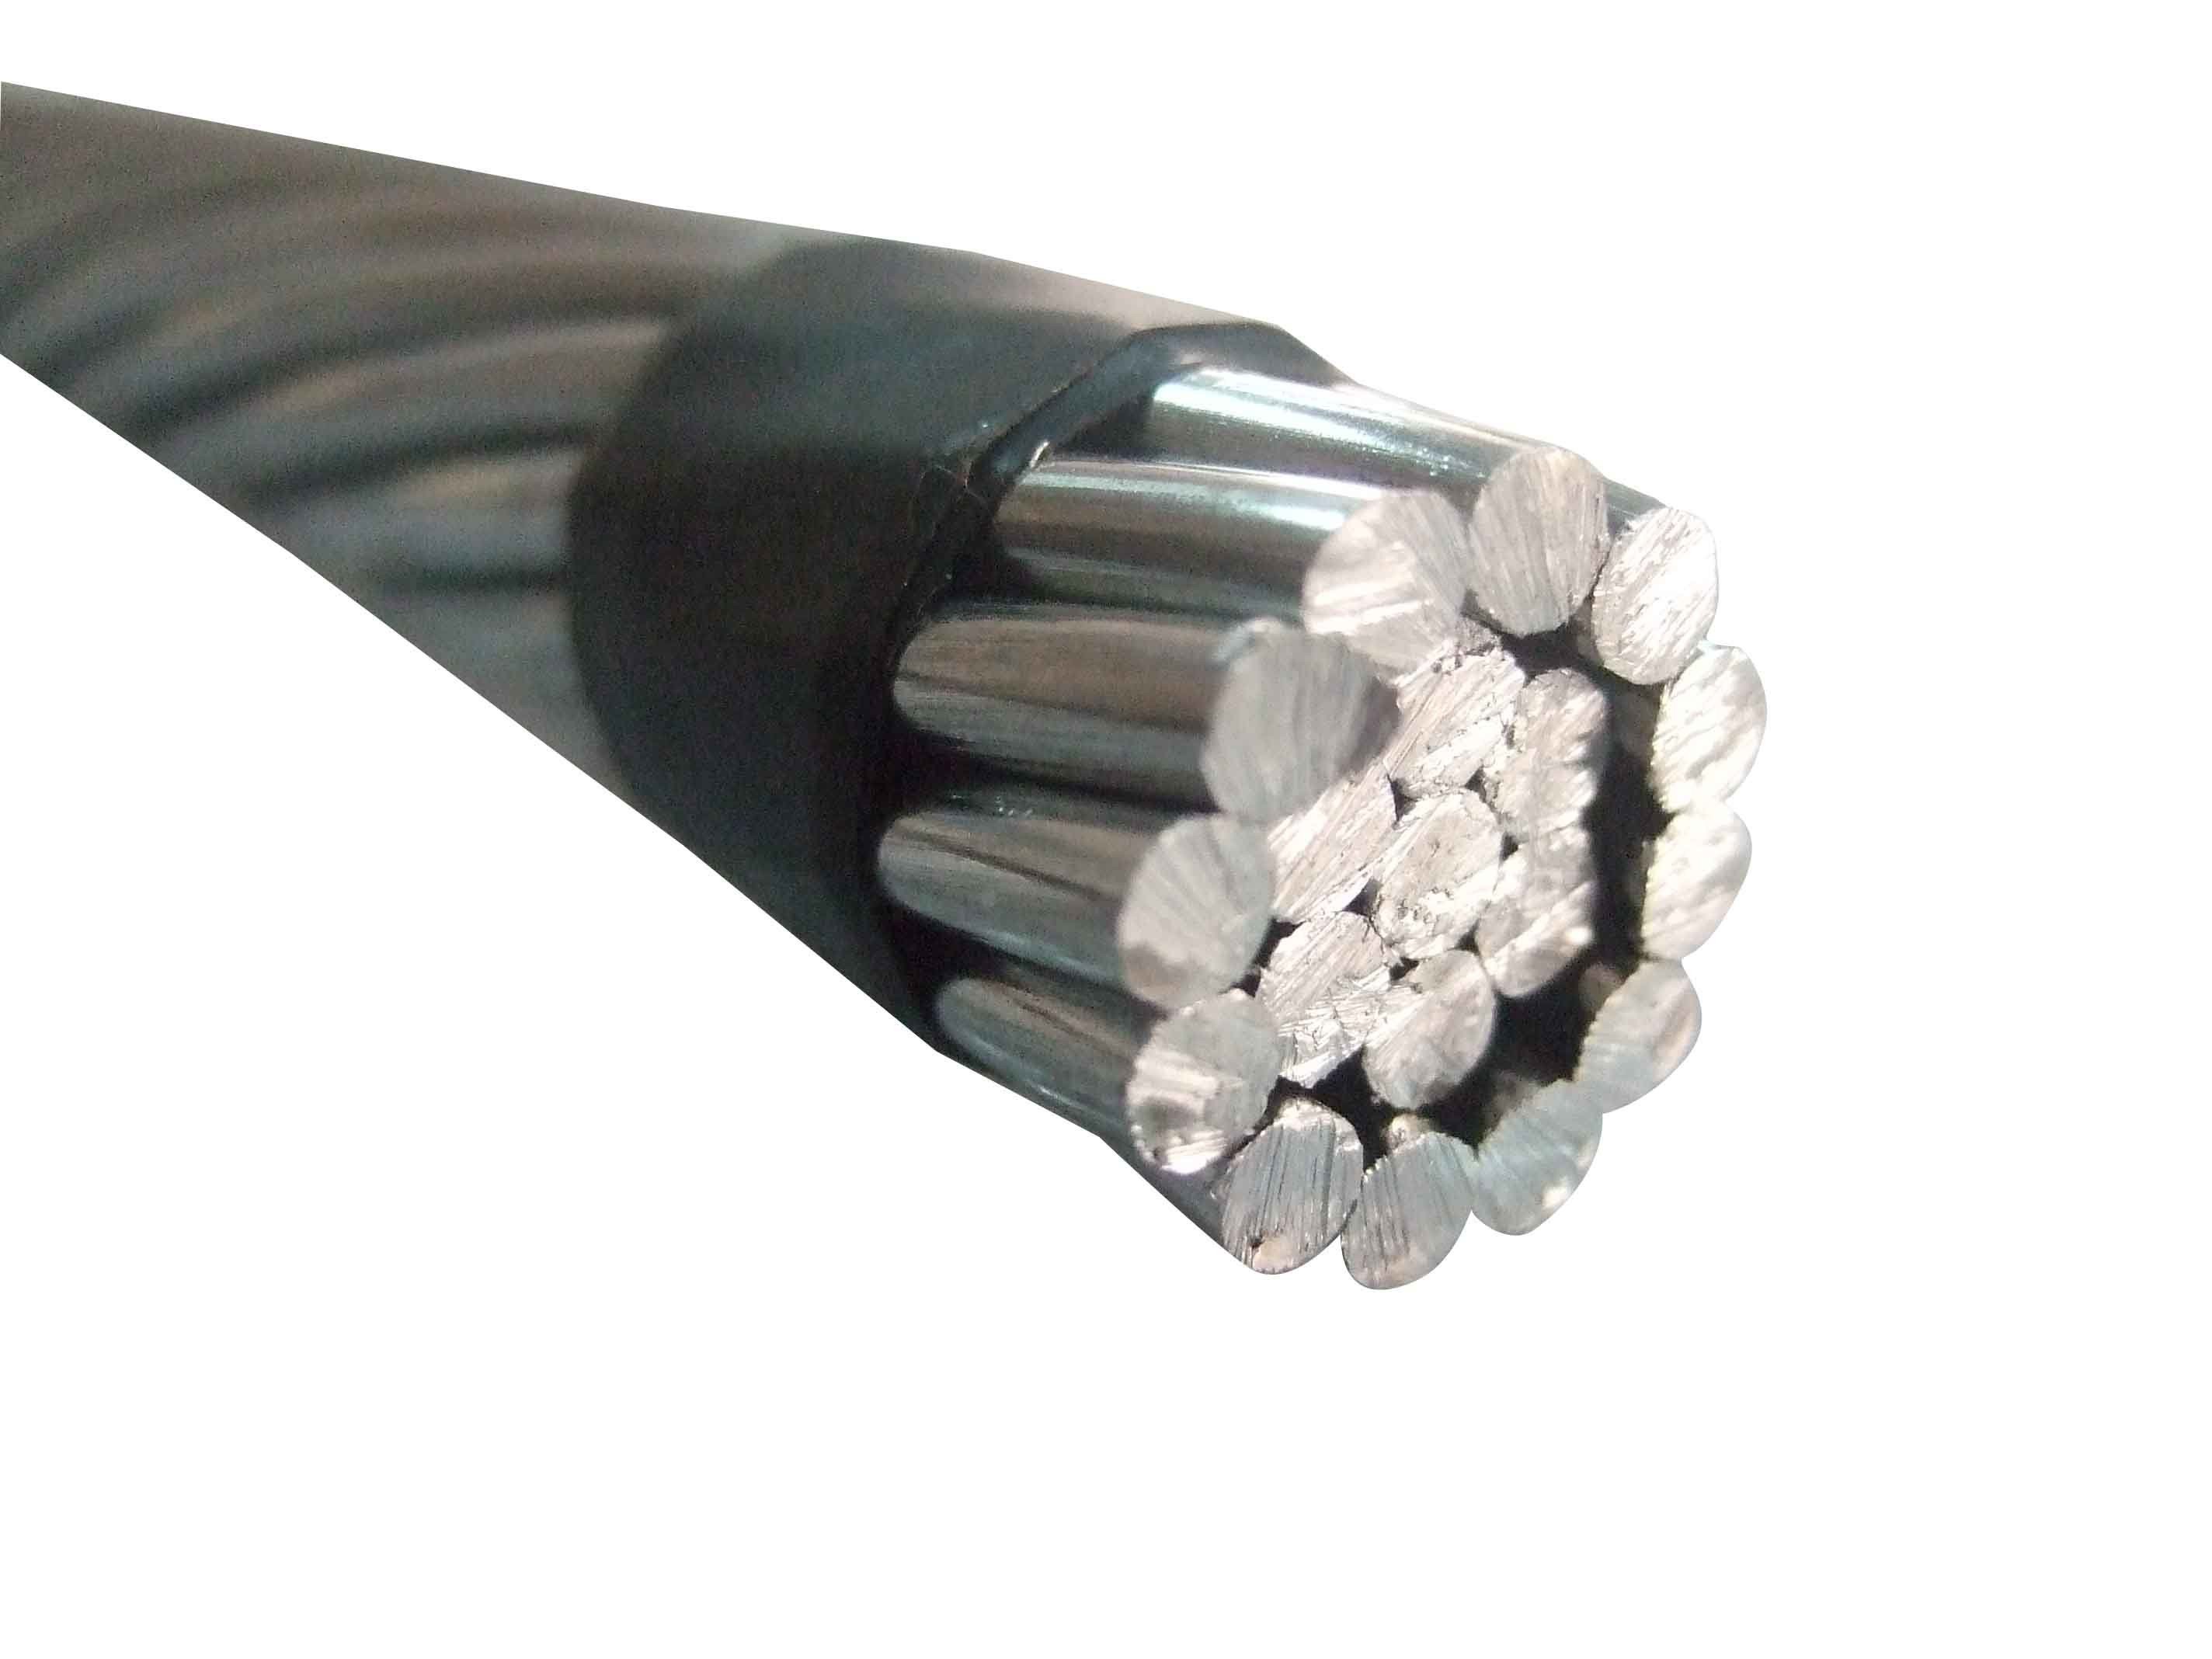  AAC AAAC ACSR Overhead Bare Aluminum Conductor Electric Wire Cable Manufactures